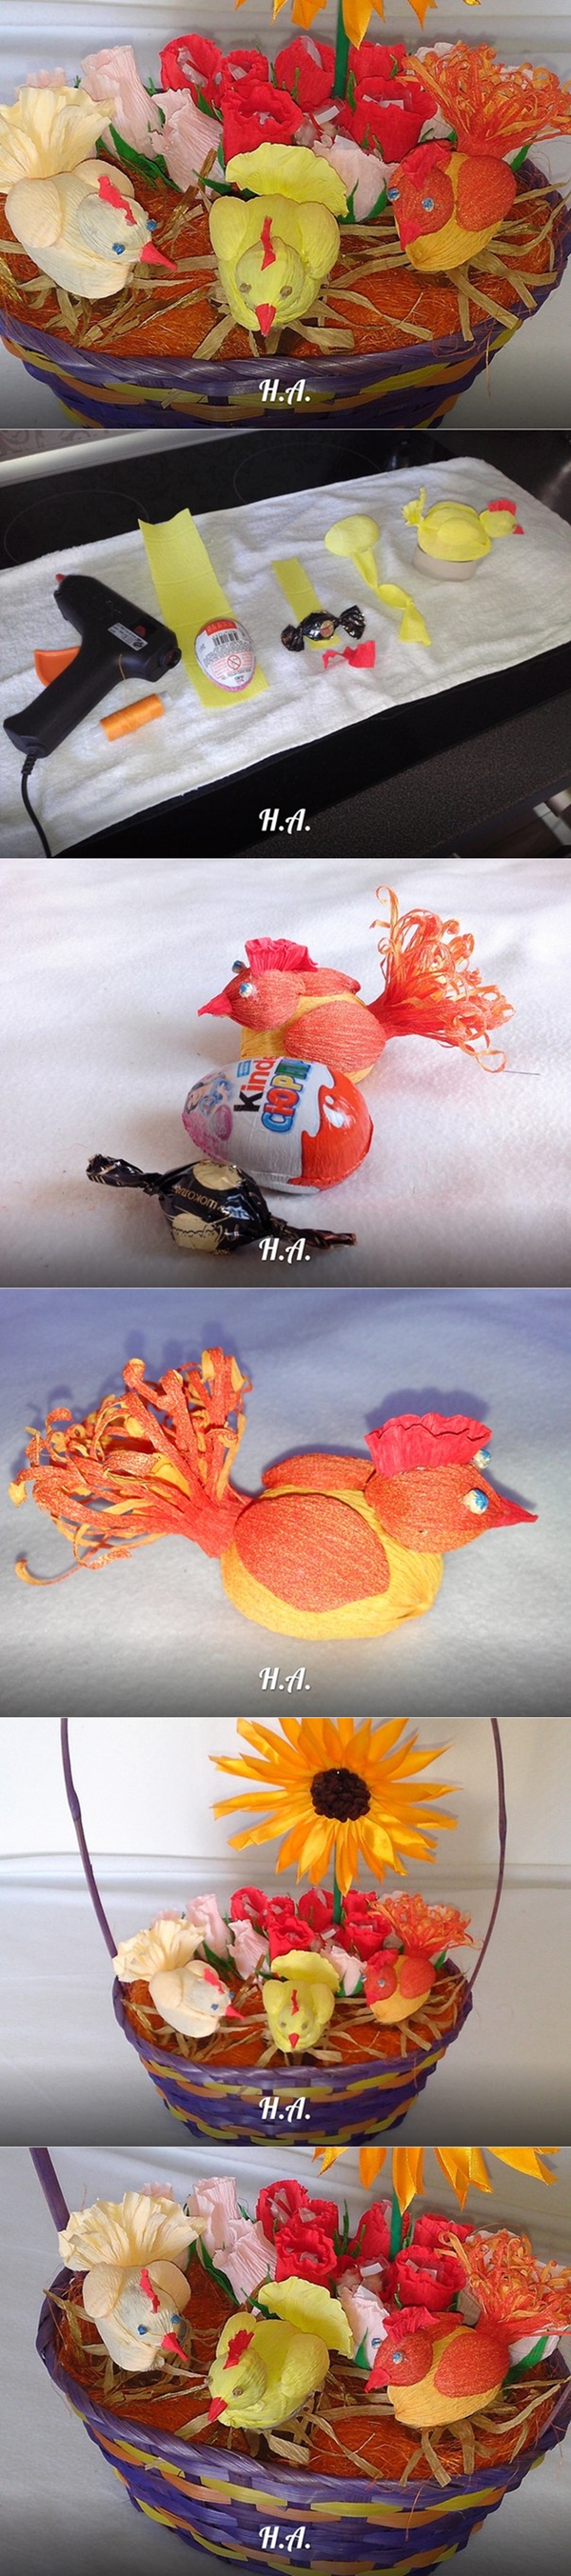 chick candy flower basket